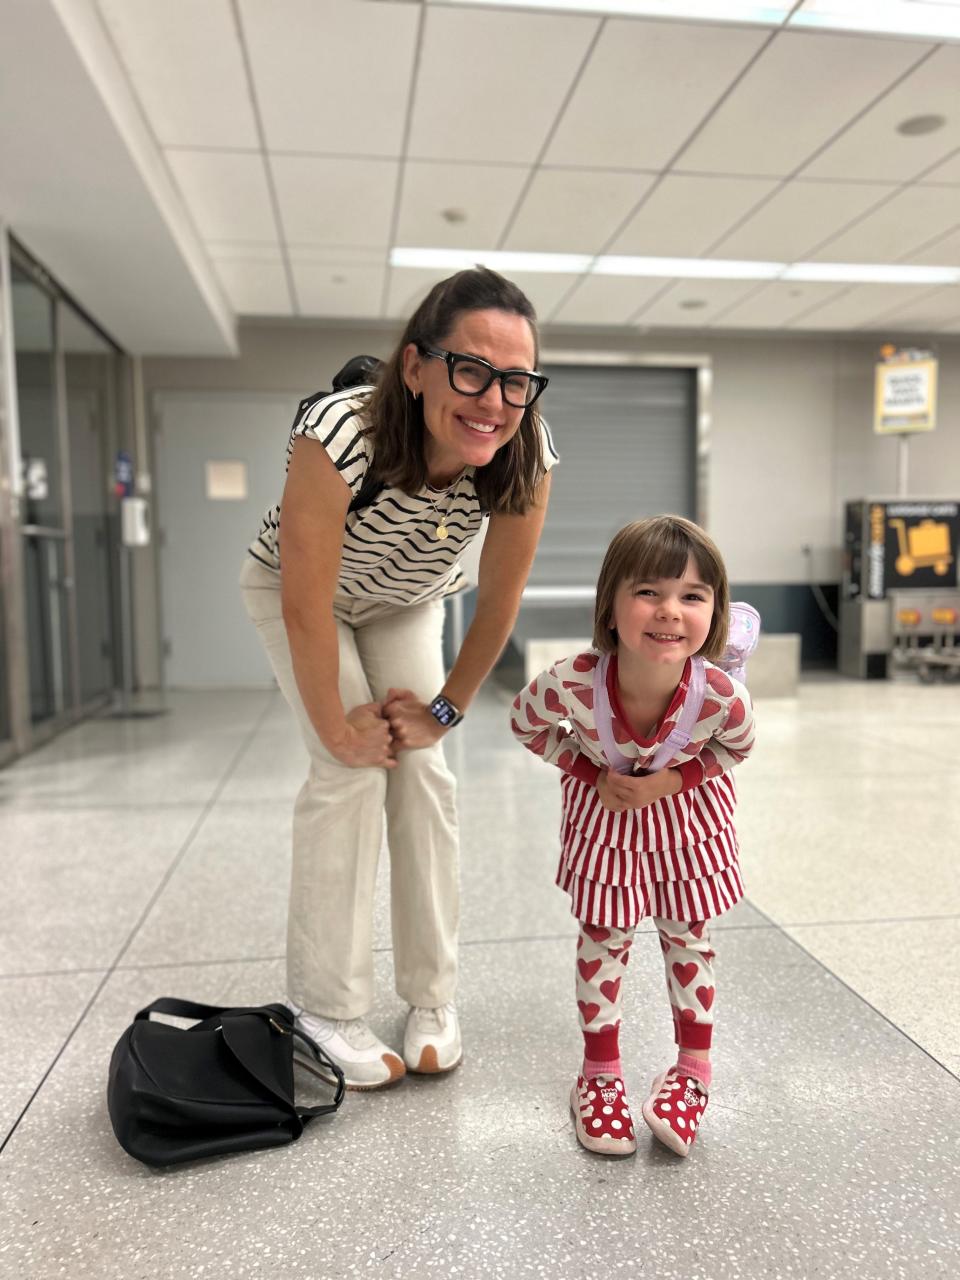 Actress Jennifer Garner poses with Clementine Rosemary Blodgett, 5, at the Rochester airport. Garner was in the area to visit the Wegmans in Canandaigua.